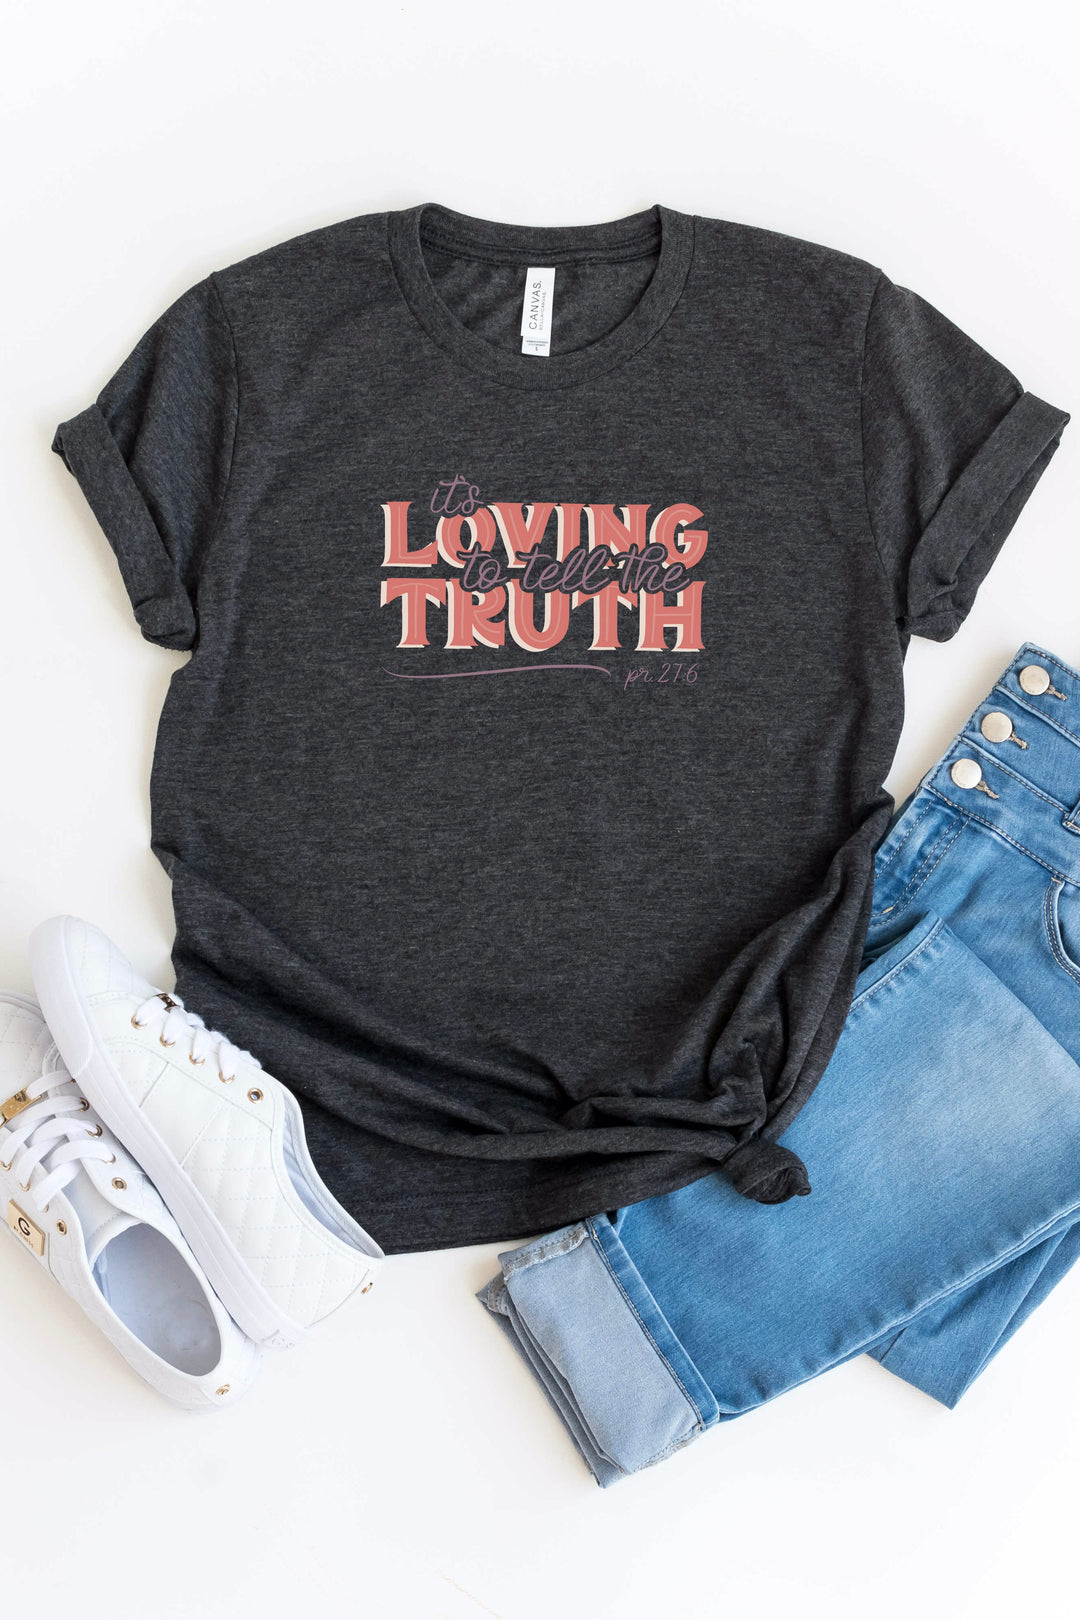 "It's Loving to Tell the Truth" Tee